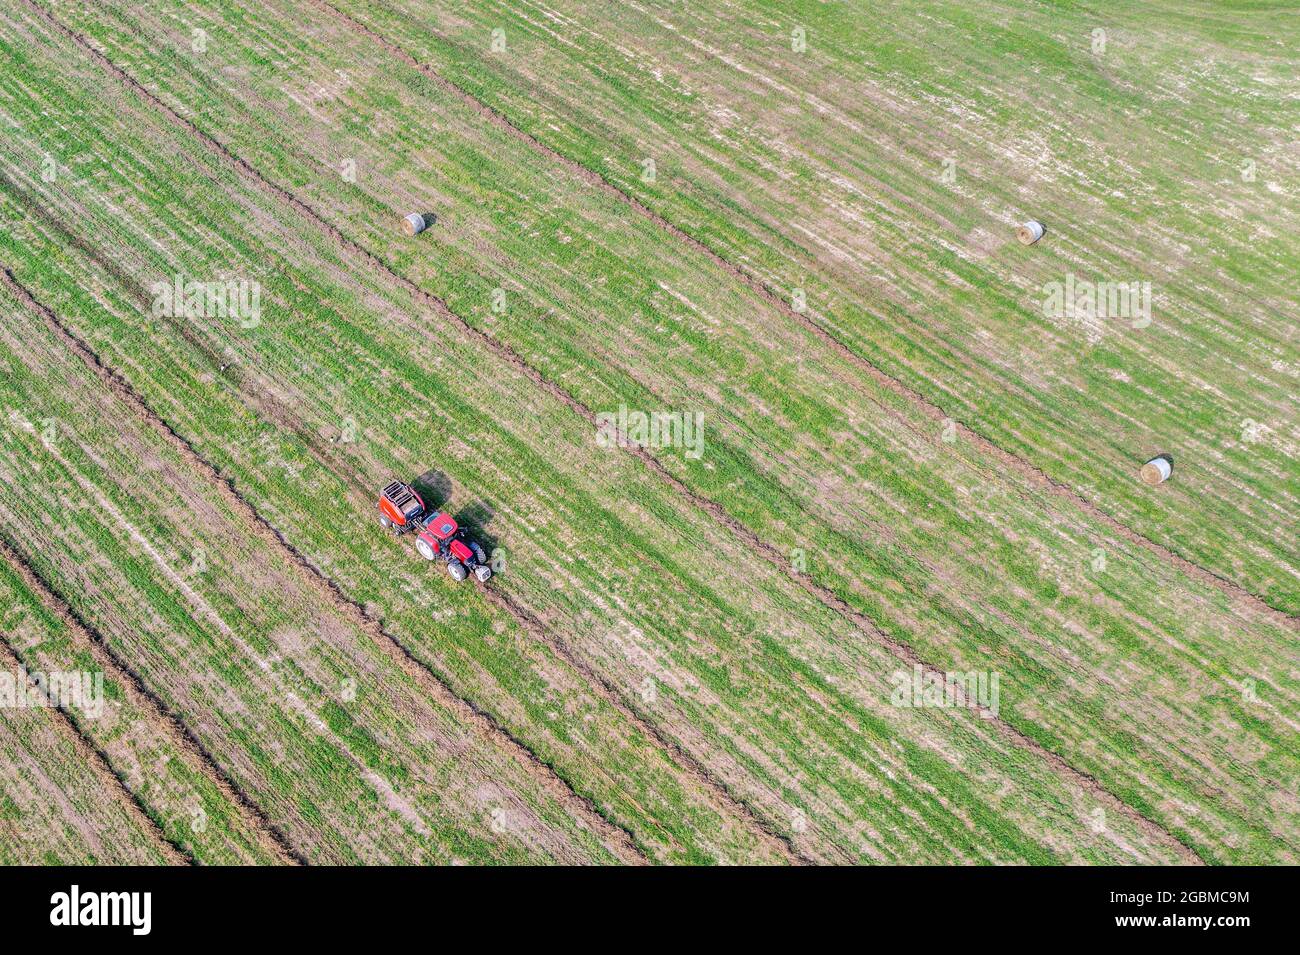 Round baler at work, making straw bales from dry grass, aerial view of agricultural machinery at work Stock Photo